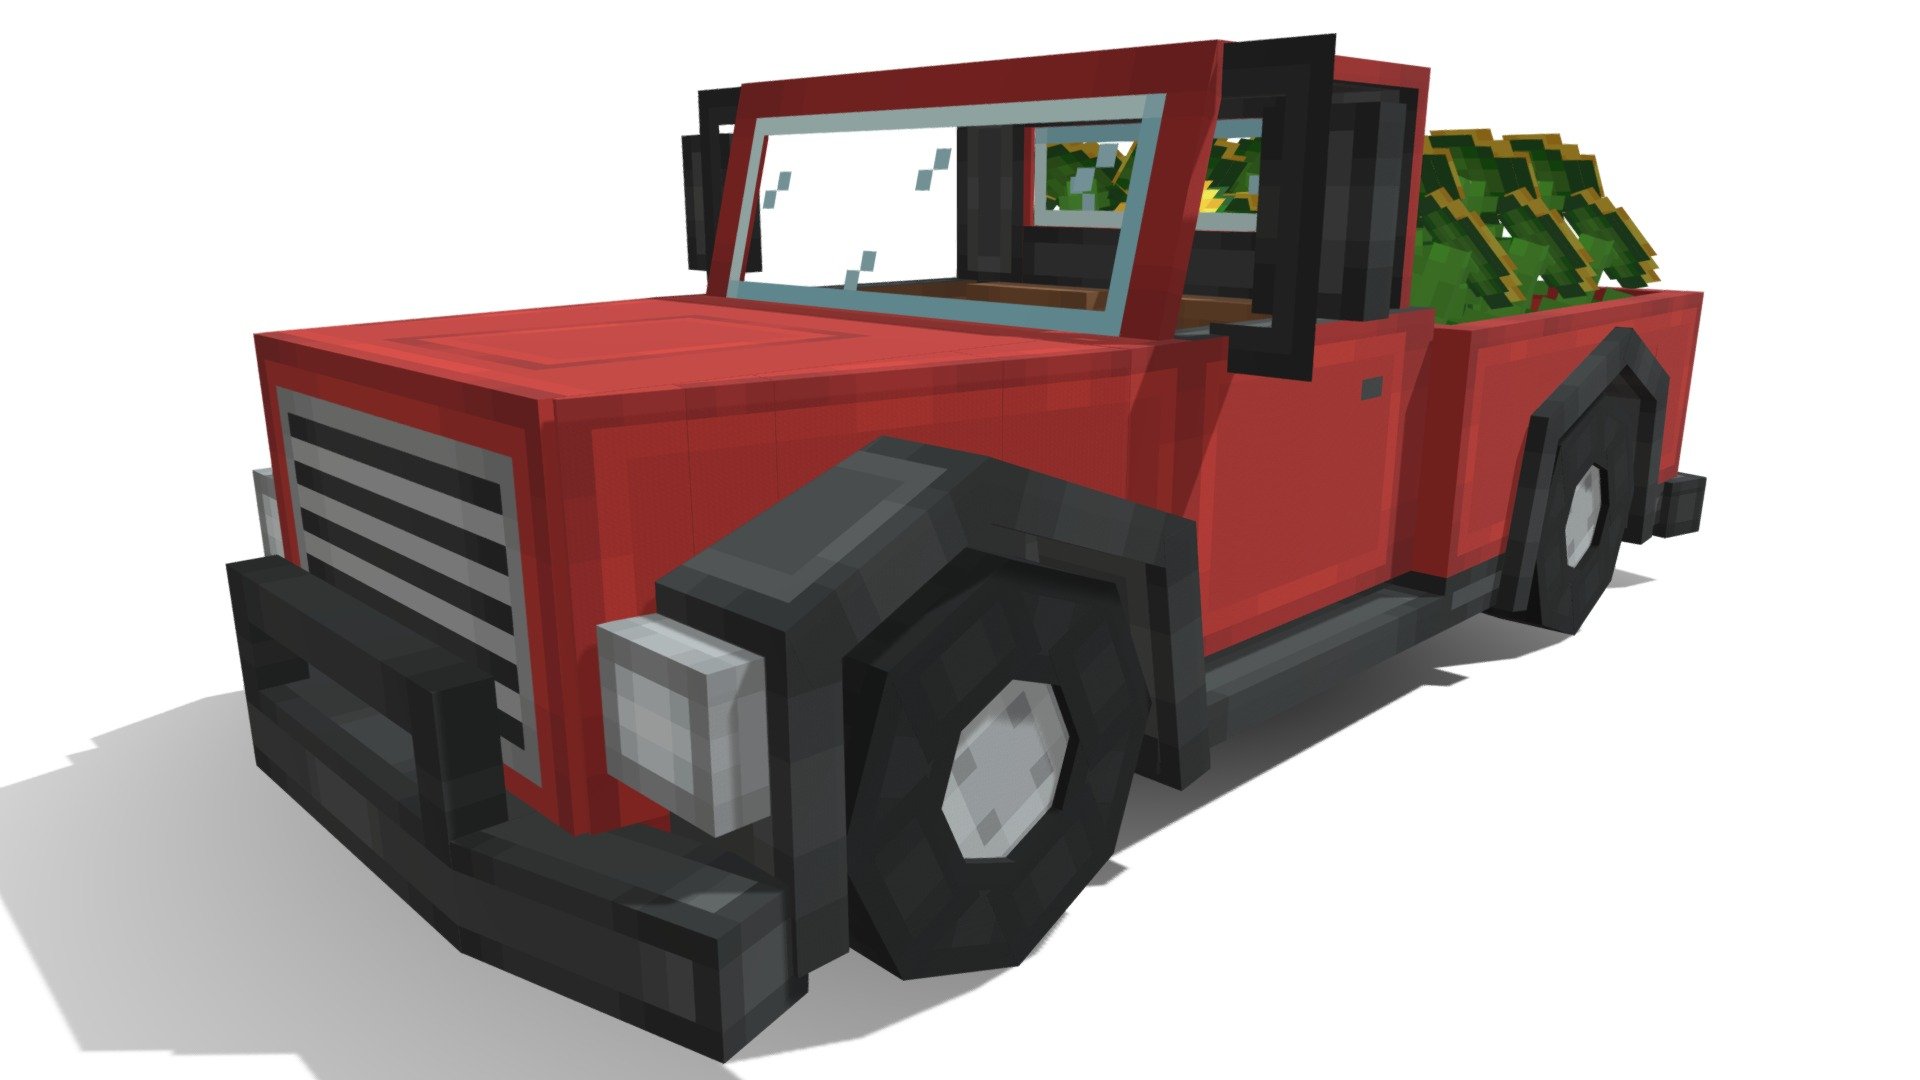 Minecraft farm truck hauling sunflowers

Created by: https://twitter.com/Wartave - Farm Truck - 3D model by Octovon (@OctovonMC) 3d model